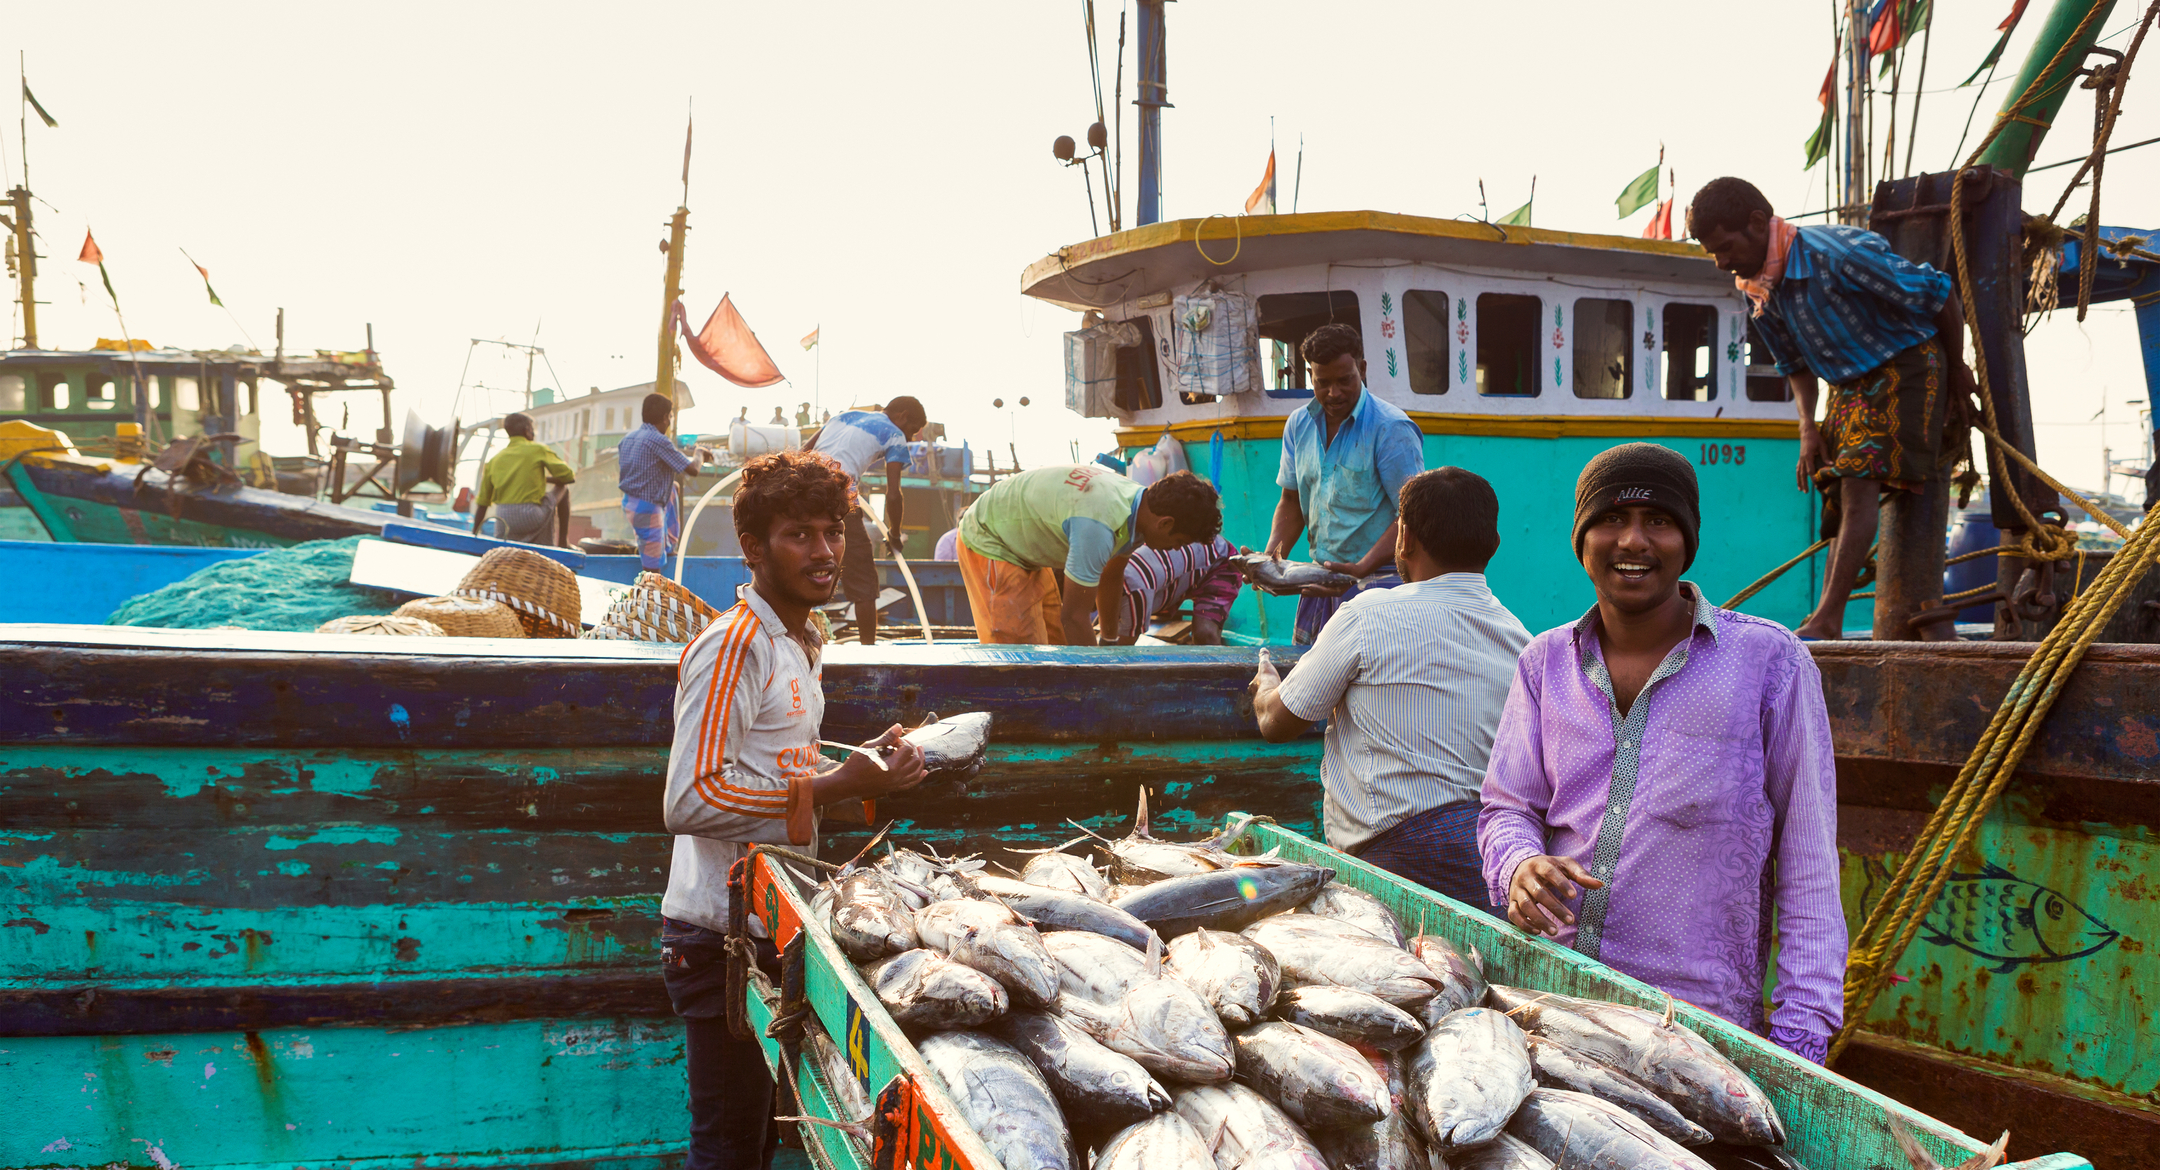 India to oppose fishing subsidy curbs at WTO meeting - Undercurrent News